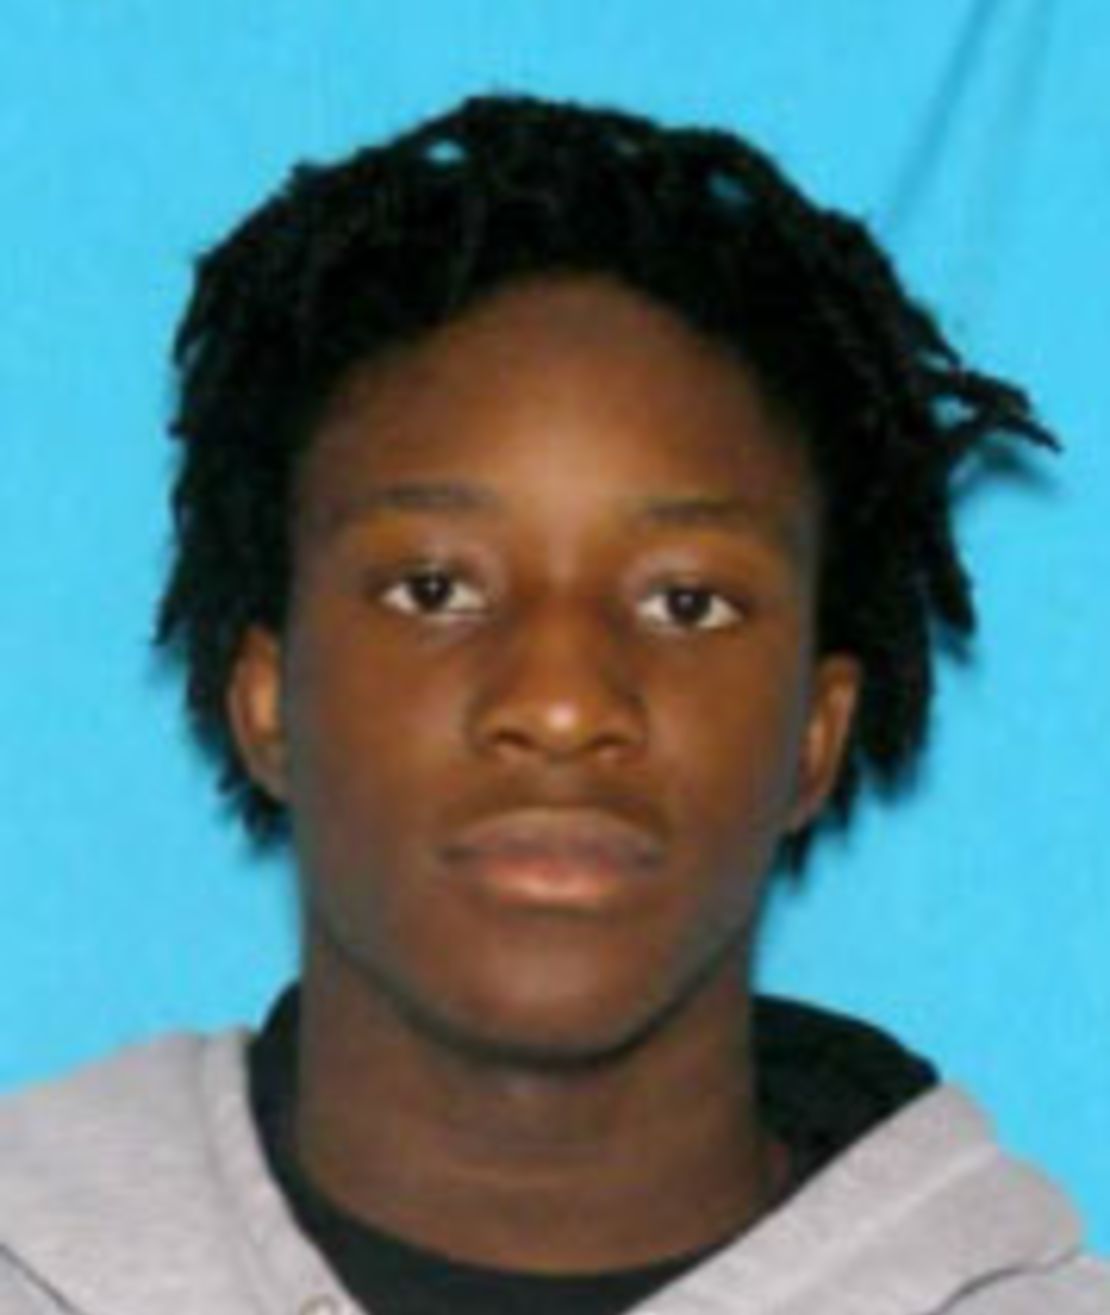 Ja'mari Alexander Alan Jones, 19, is a suspect in the death of a 30-year-old man in a shooting at a bar in suburban Seattle, according to Bellevue police.